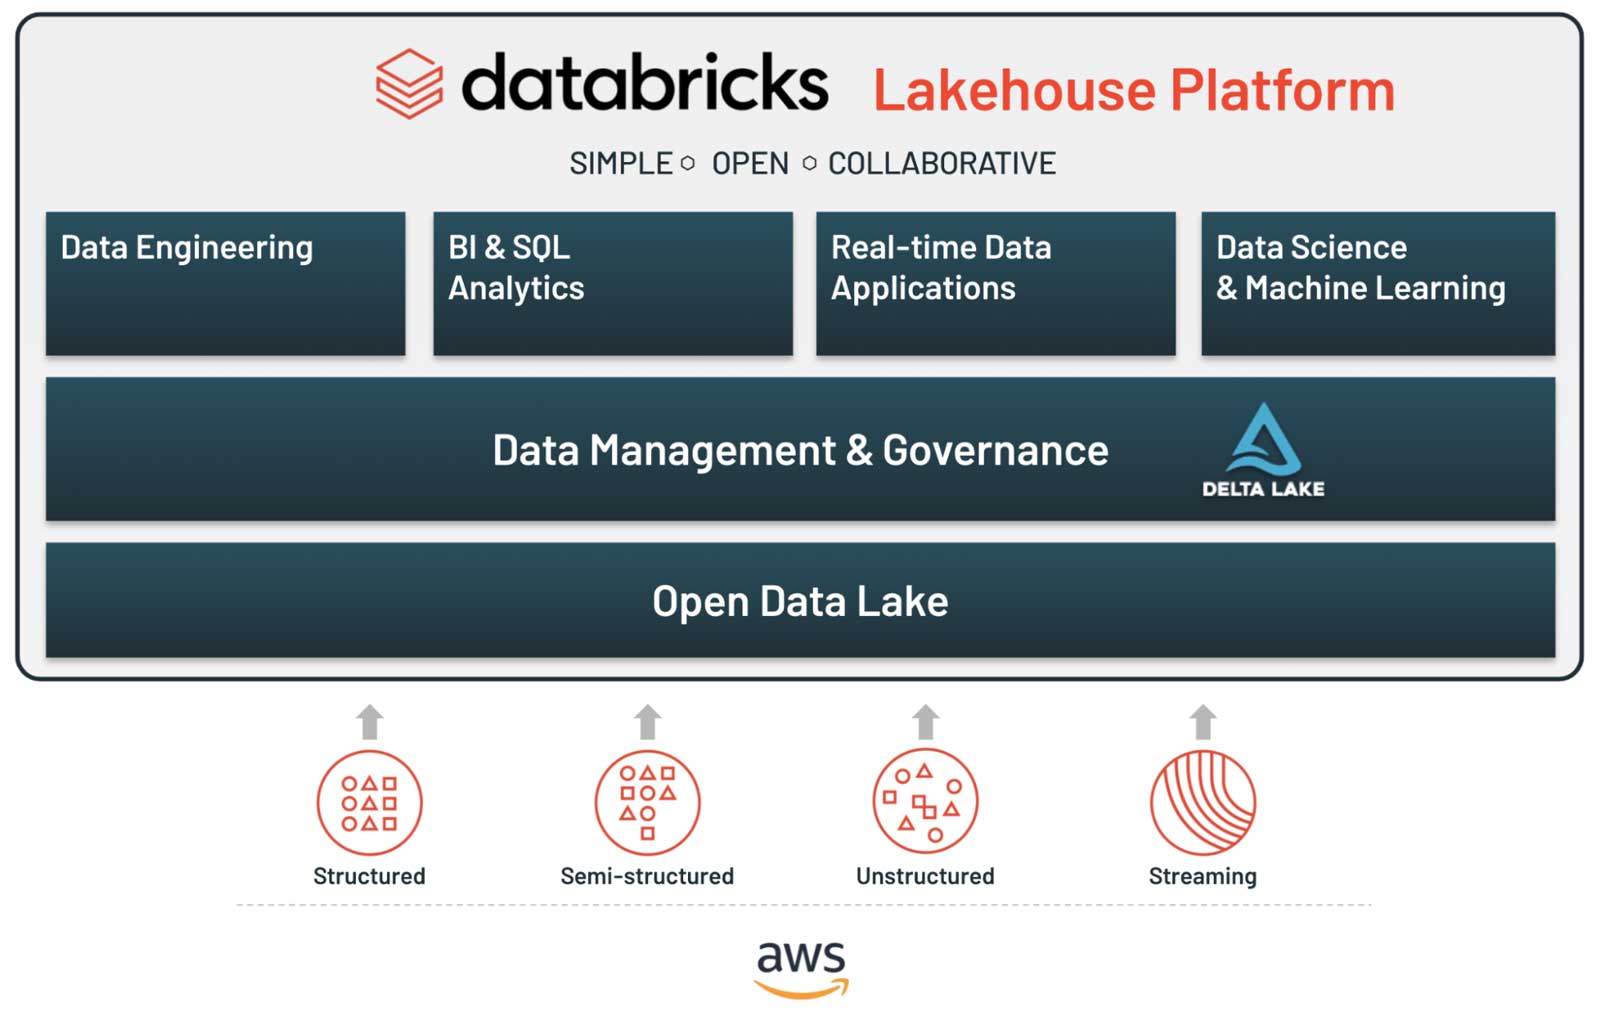 The key for Bread to select the Databricks Lakehouse Platform was its foundation in Delta Lake, which empowers its data science and analytics engineering to run jobs and analyze data where it exists without incurring costs on egress/ingress. 